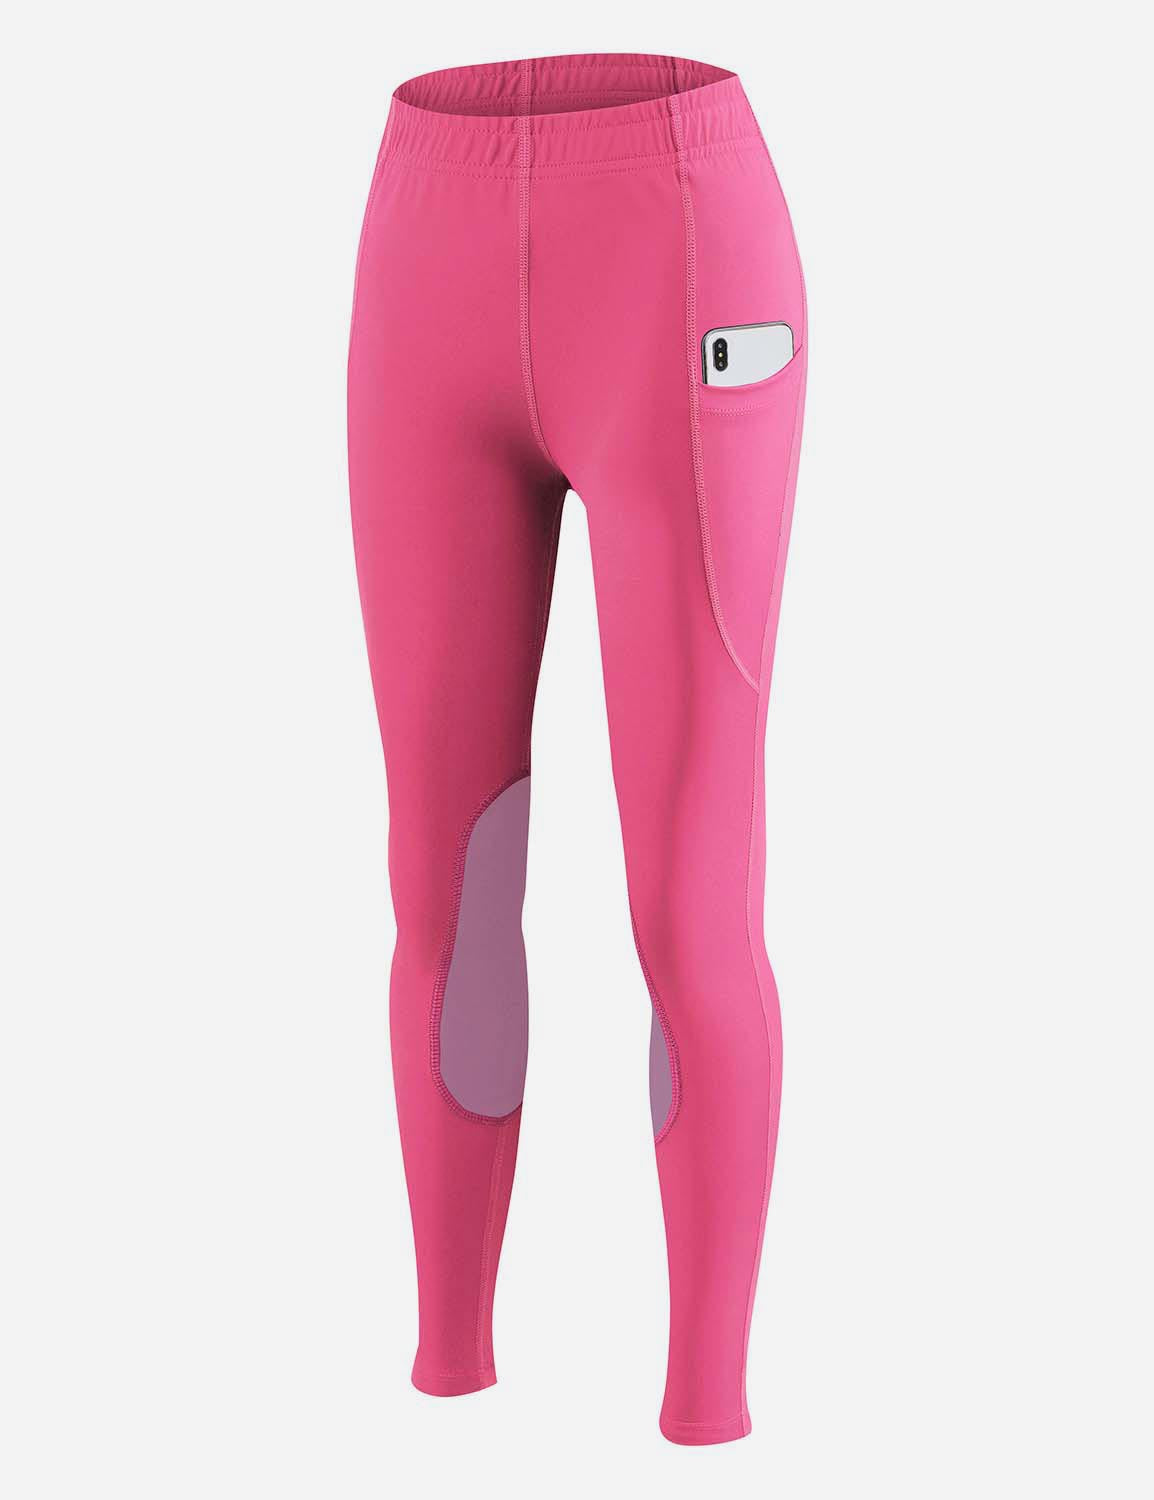 Baleaf Kid's UPF 50+ Pocketed Equestrian Riding Tights aab181 Hot Pink Front